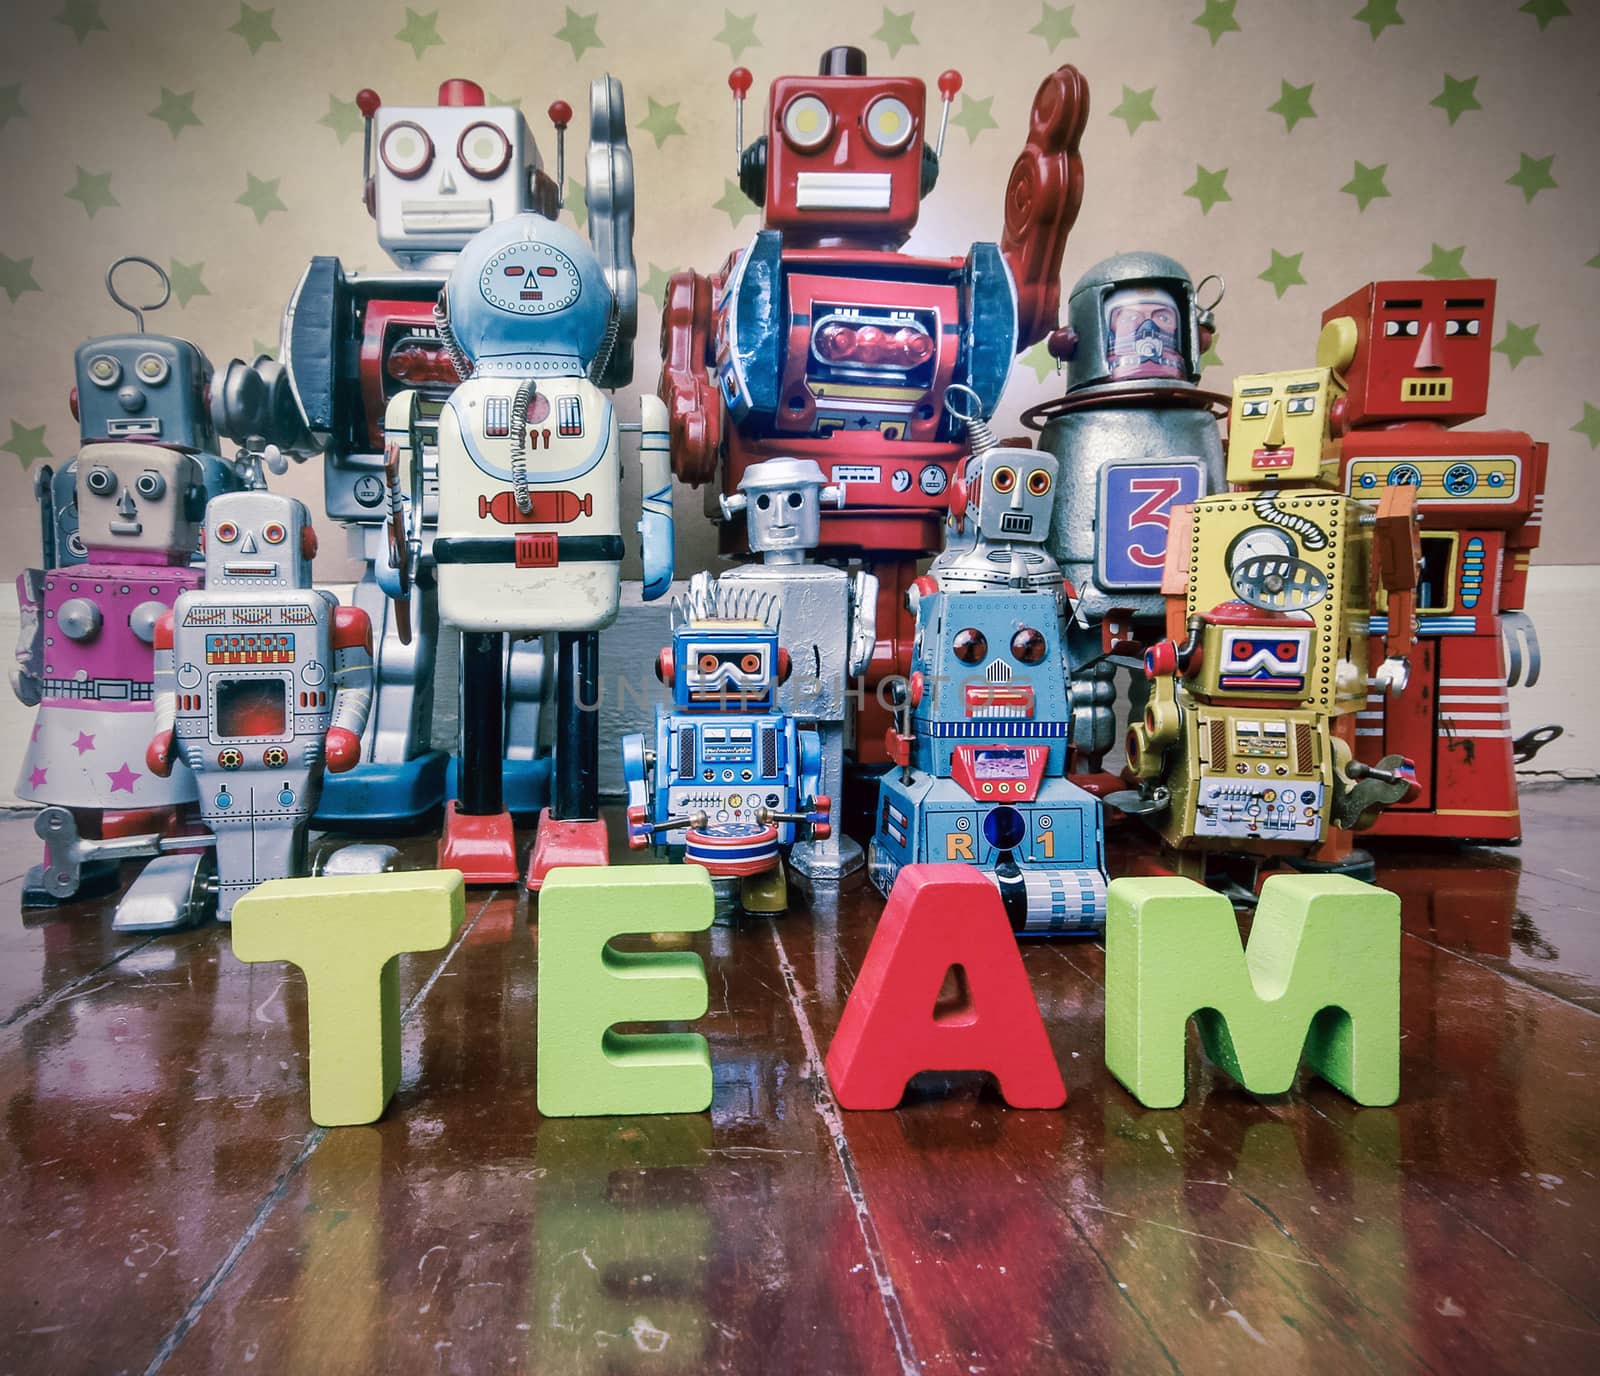 Concept TEAM WORK  wirh wooden letters and vintage robot toys